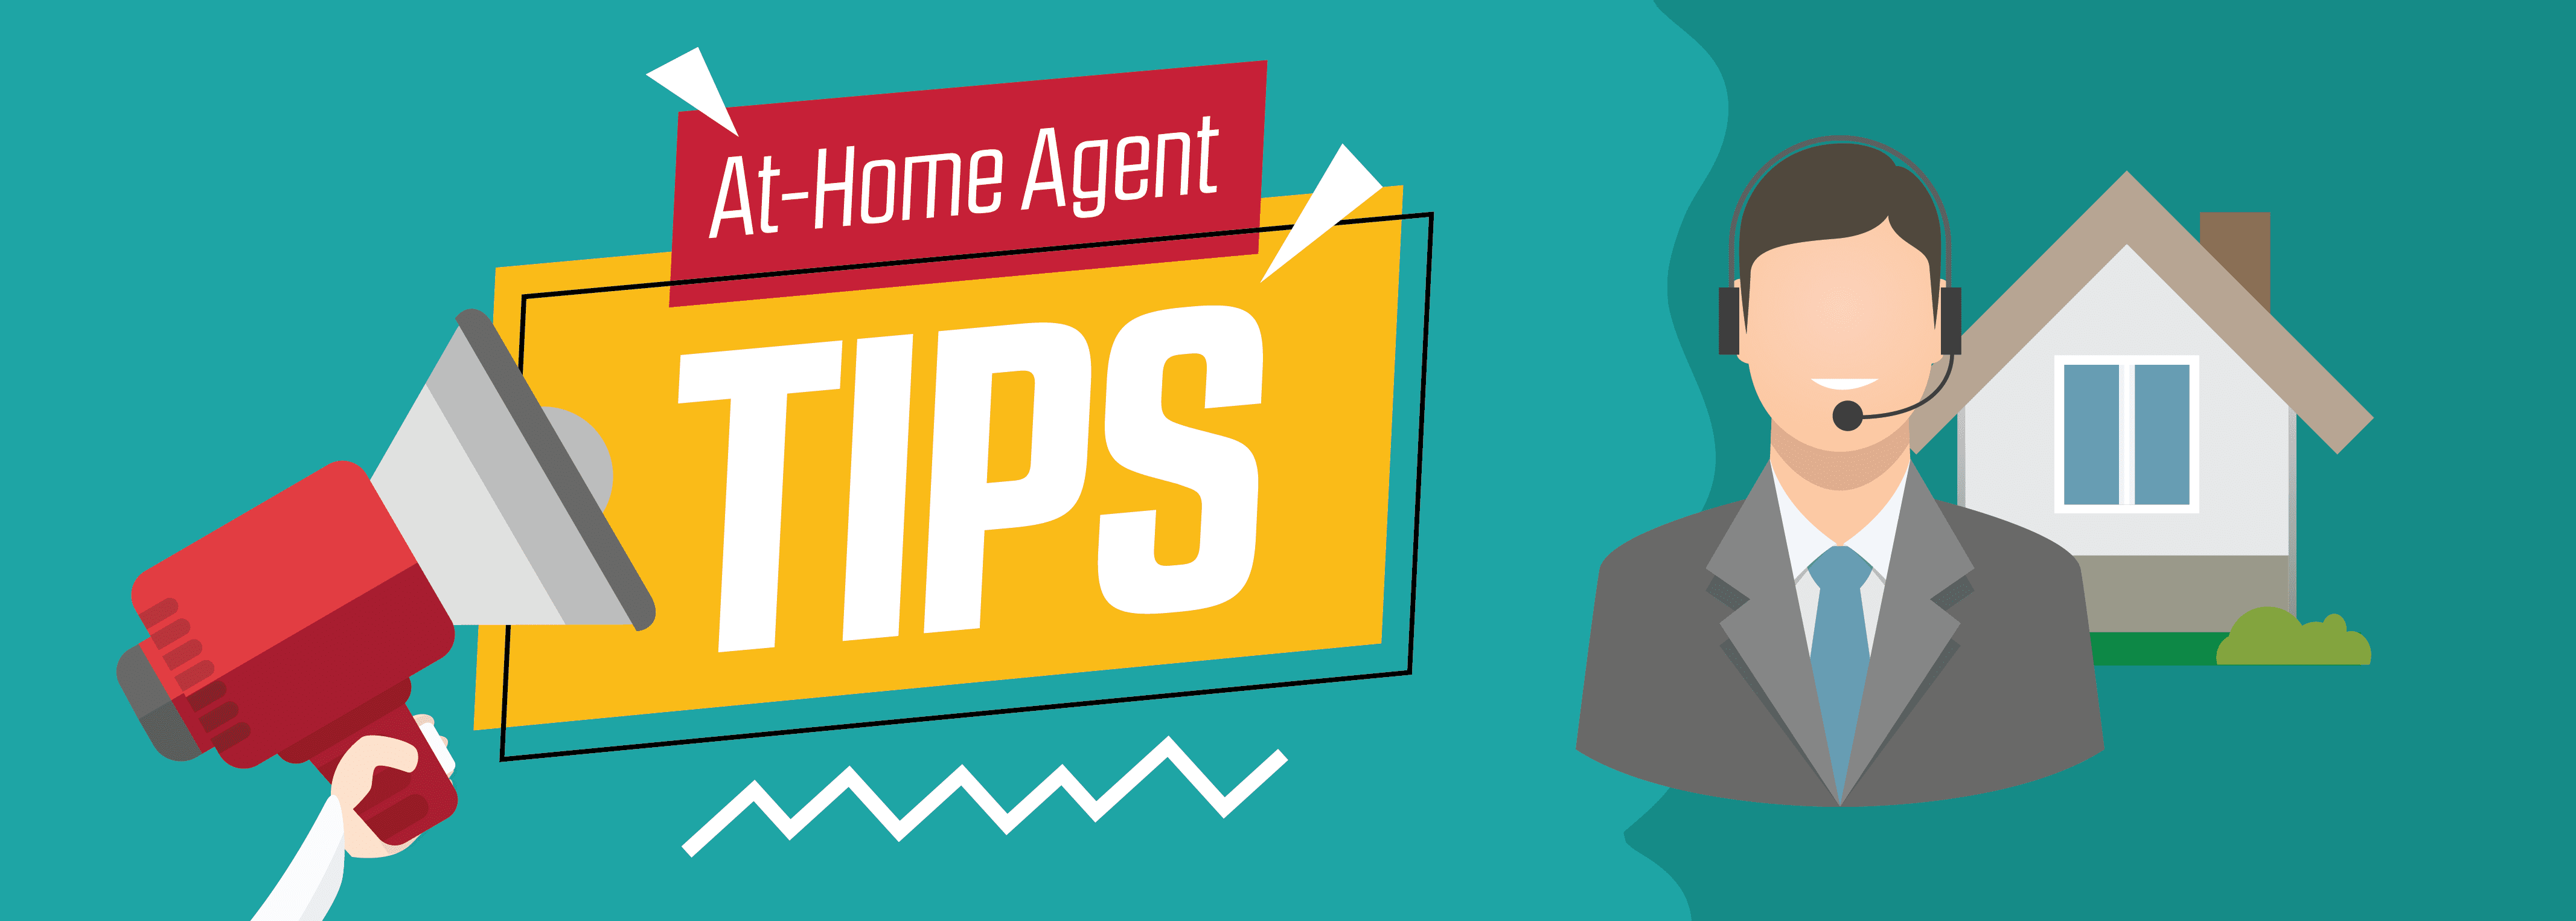 Tips For Call Center Agents Working From Home